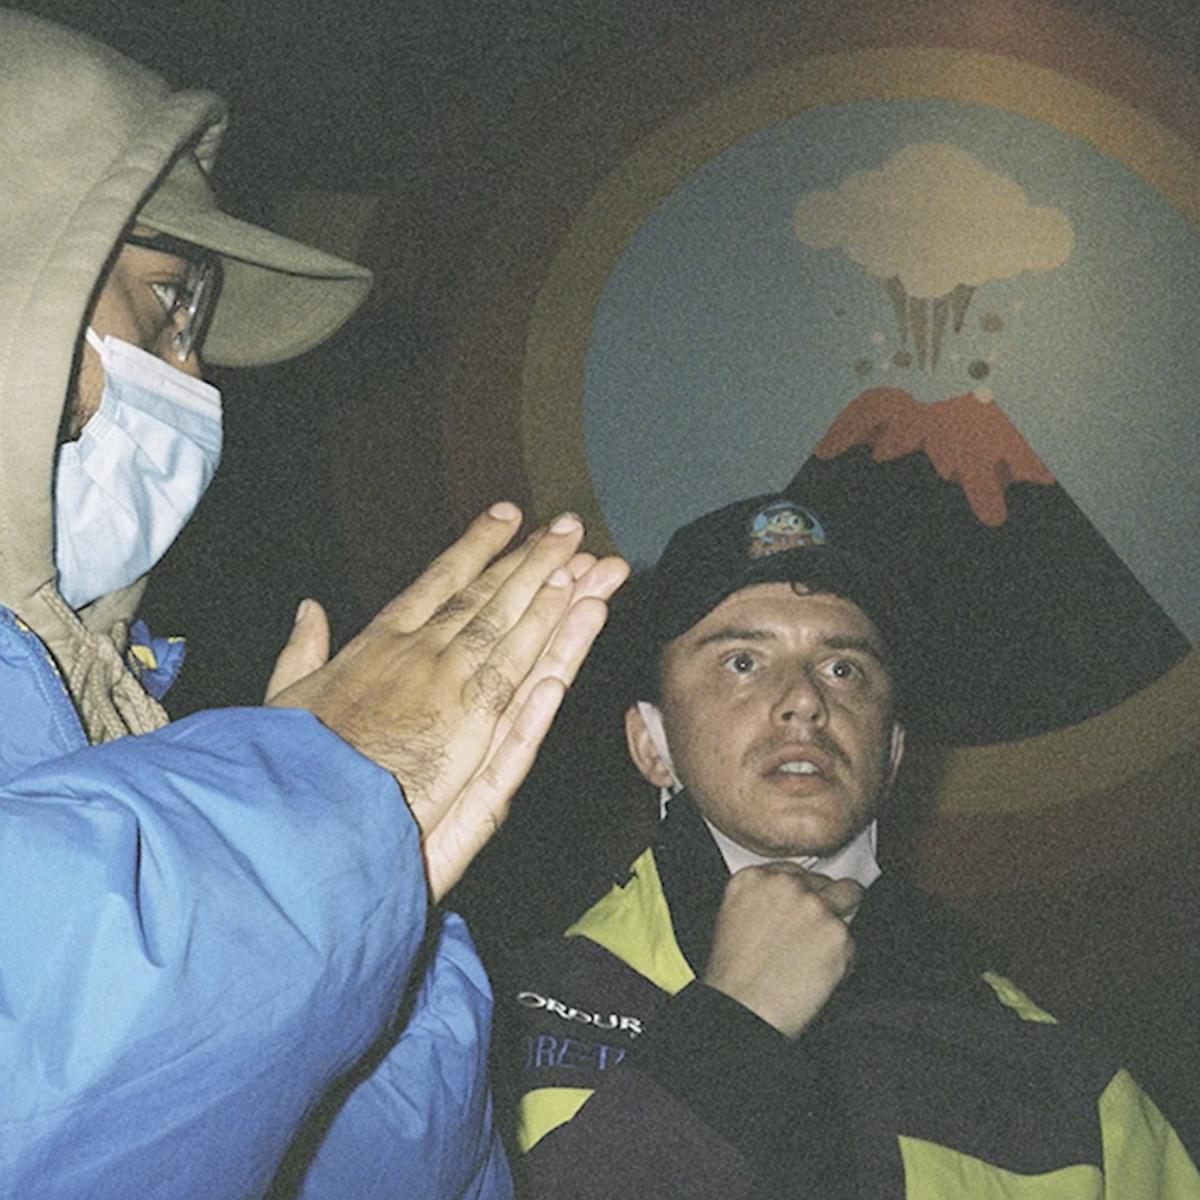 Logic Links Up With LIKE, Blu & Exile For “Orville”